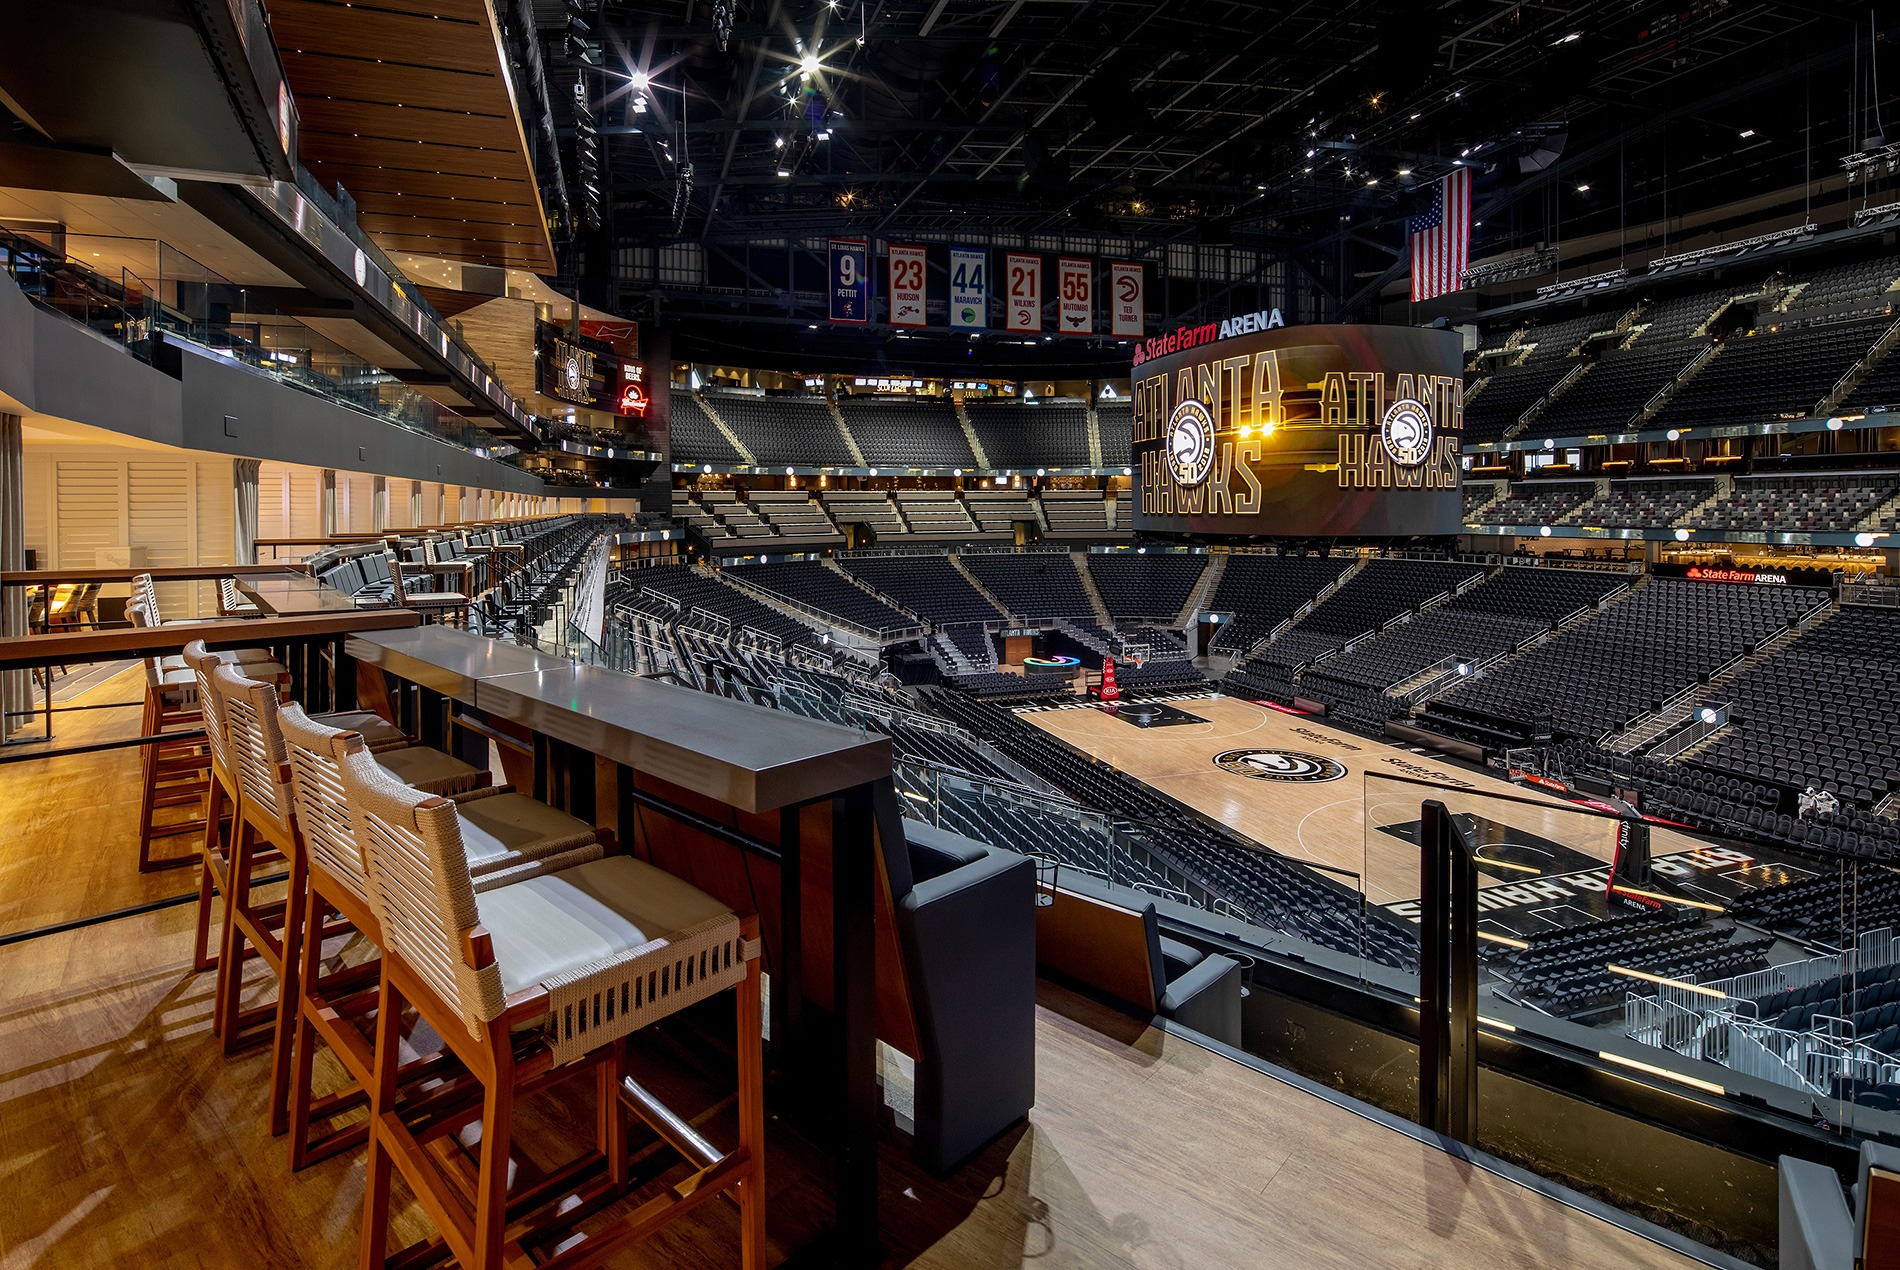 State Farm Arena Transformation and Experiential Seating Products are True  to Atlanta